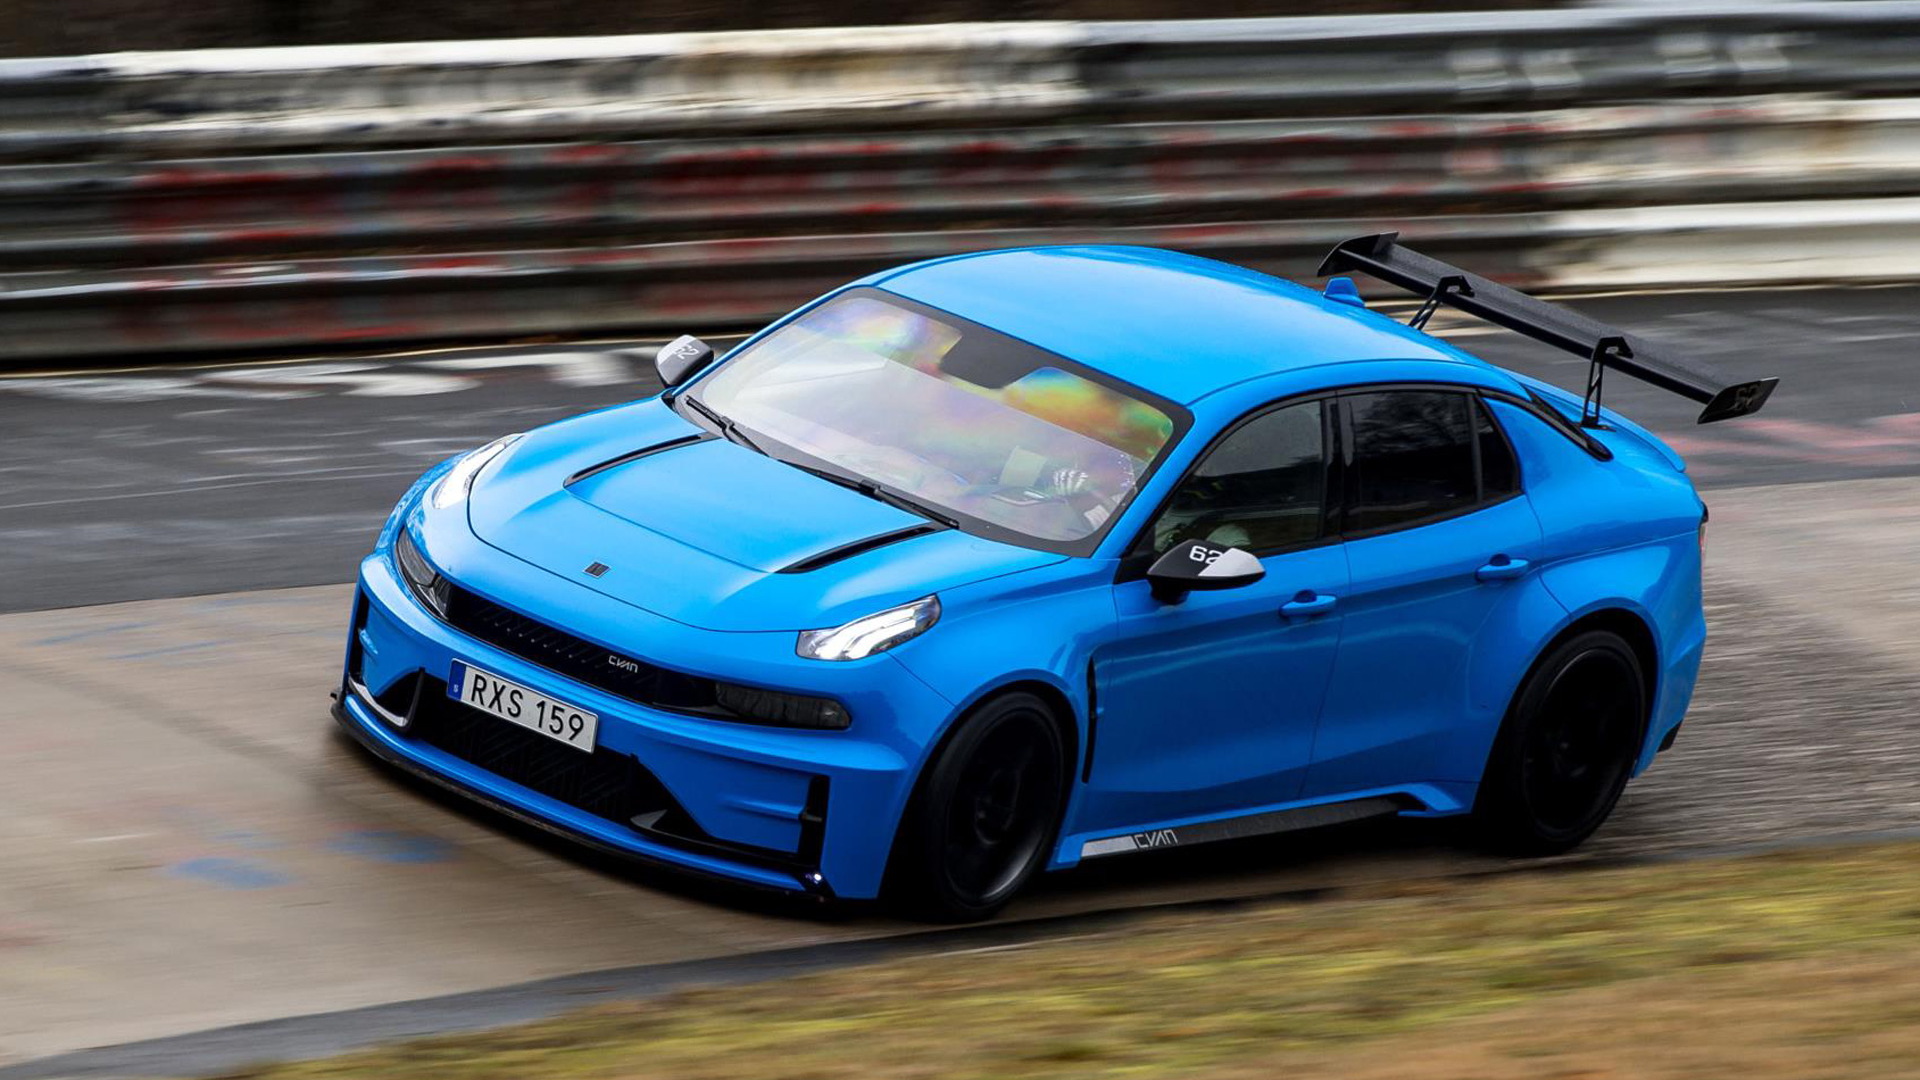 Lynk & Co. 03 Cyan Concept at the Nürburgring